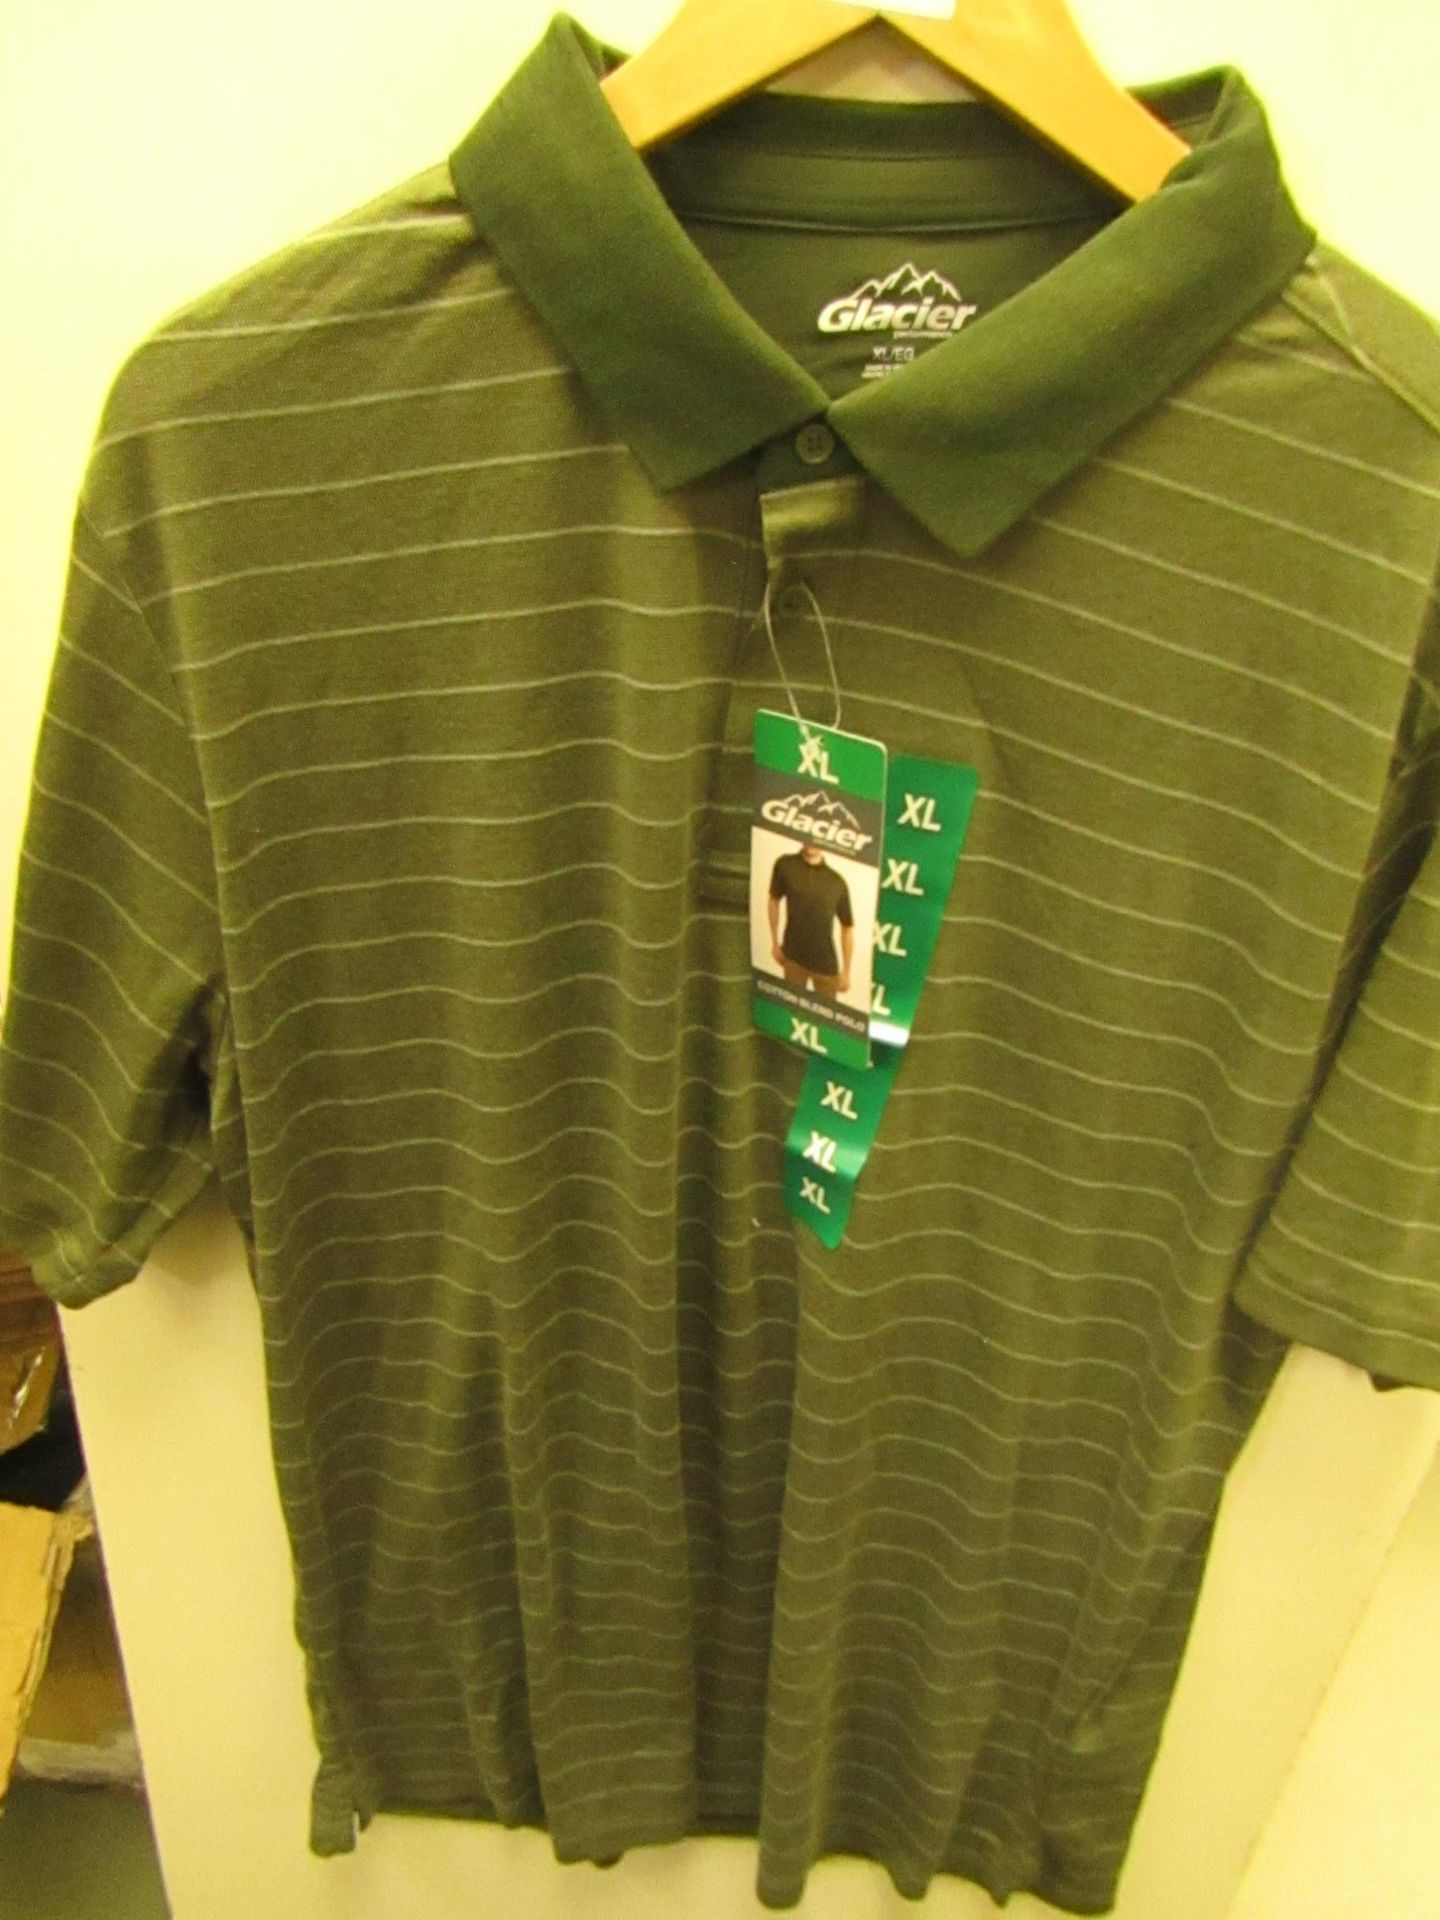 Glacier Performance Polo T/Shirt Green Stripe Mens Size X/L New With Tags